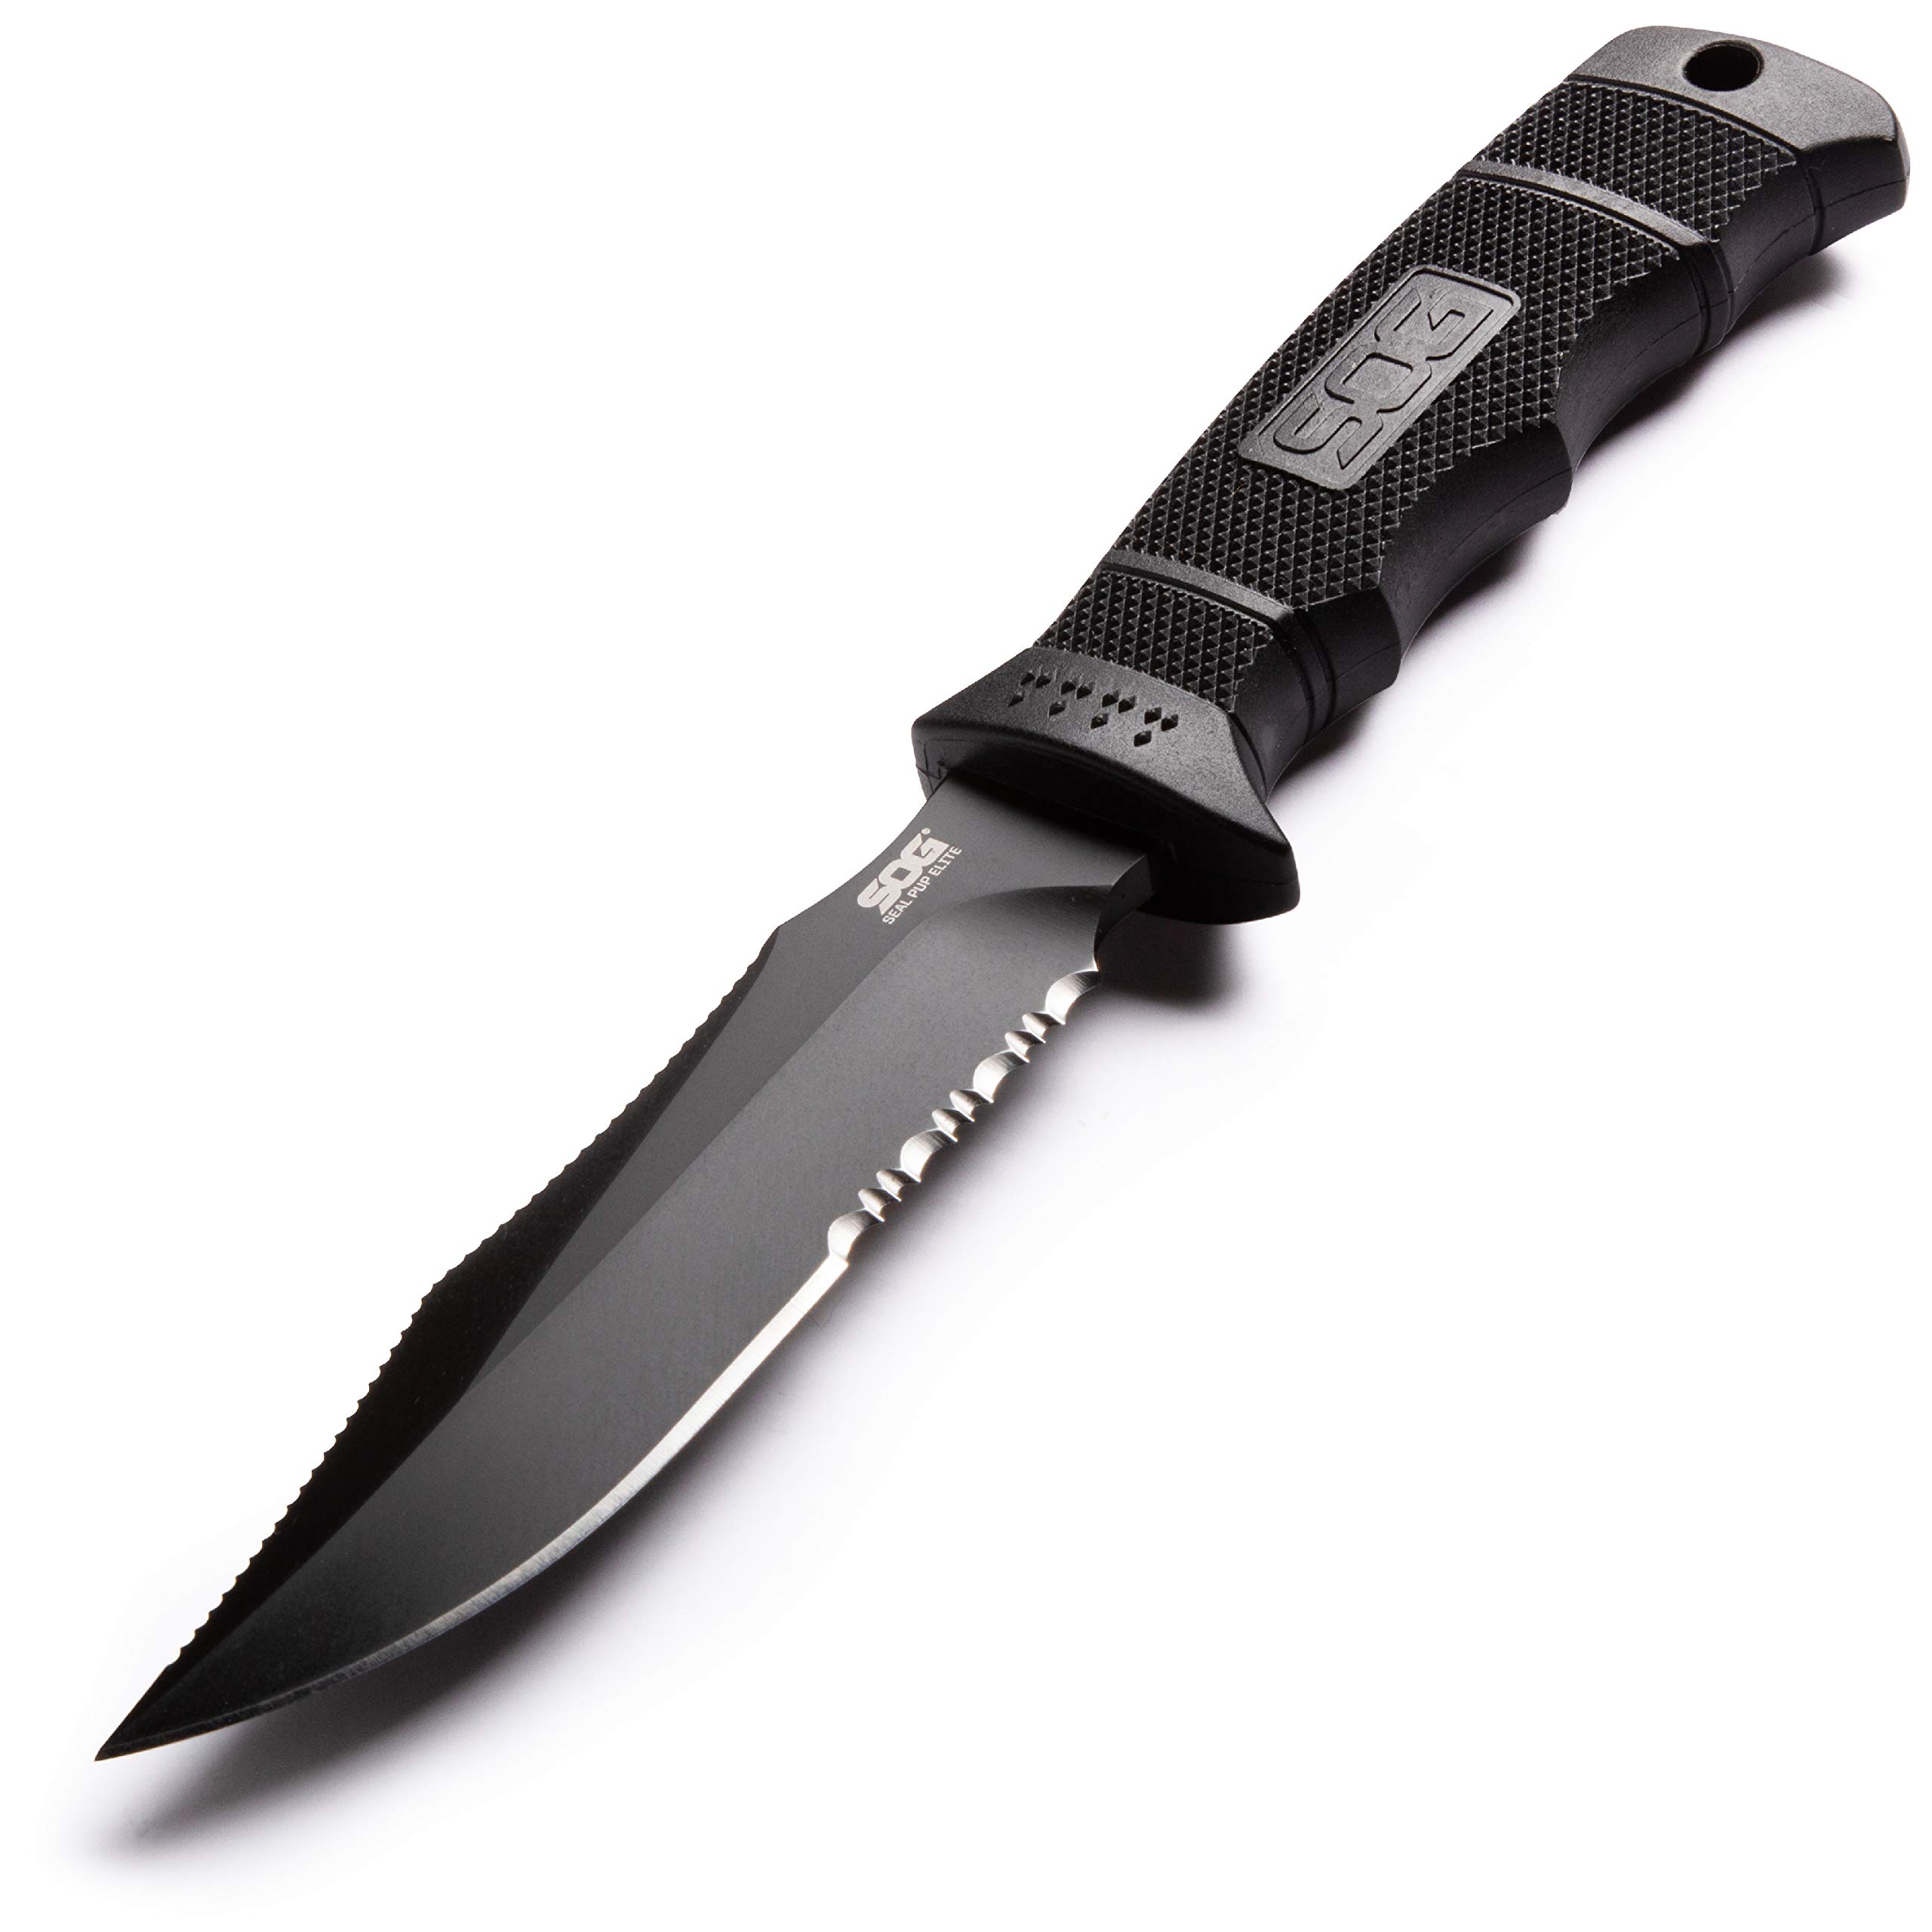 SOg Seal Pup Elite Tactical Fixed Blade- Survival and Hunting Knife with Sheath 4.75 Inch combat Knife Blade (E37T-K)